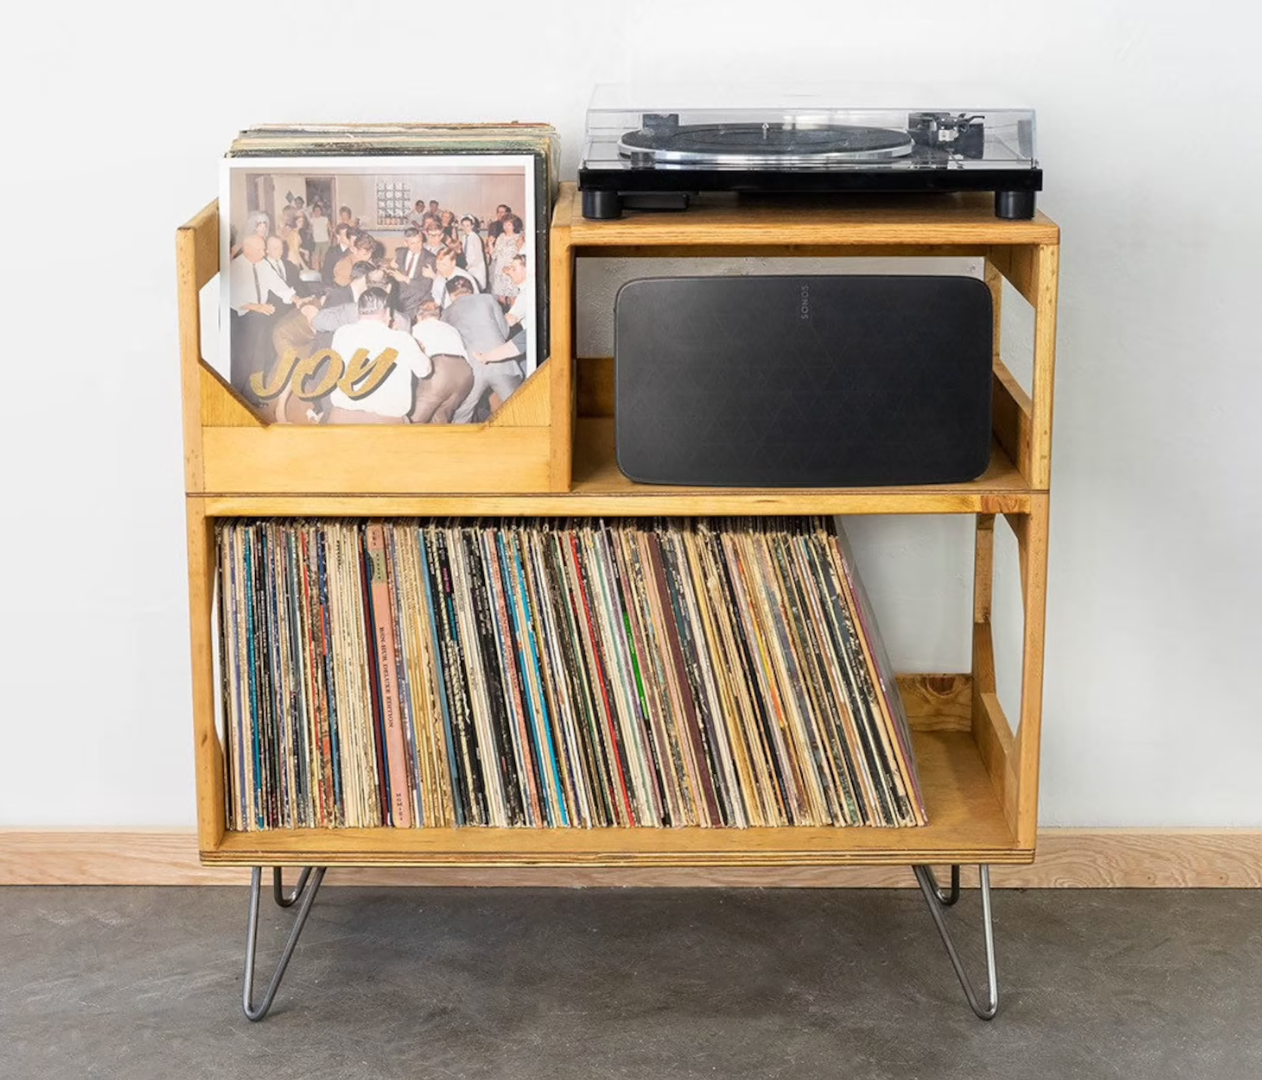 Wooden record player stand with cubby for vinyls and shelf underneath